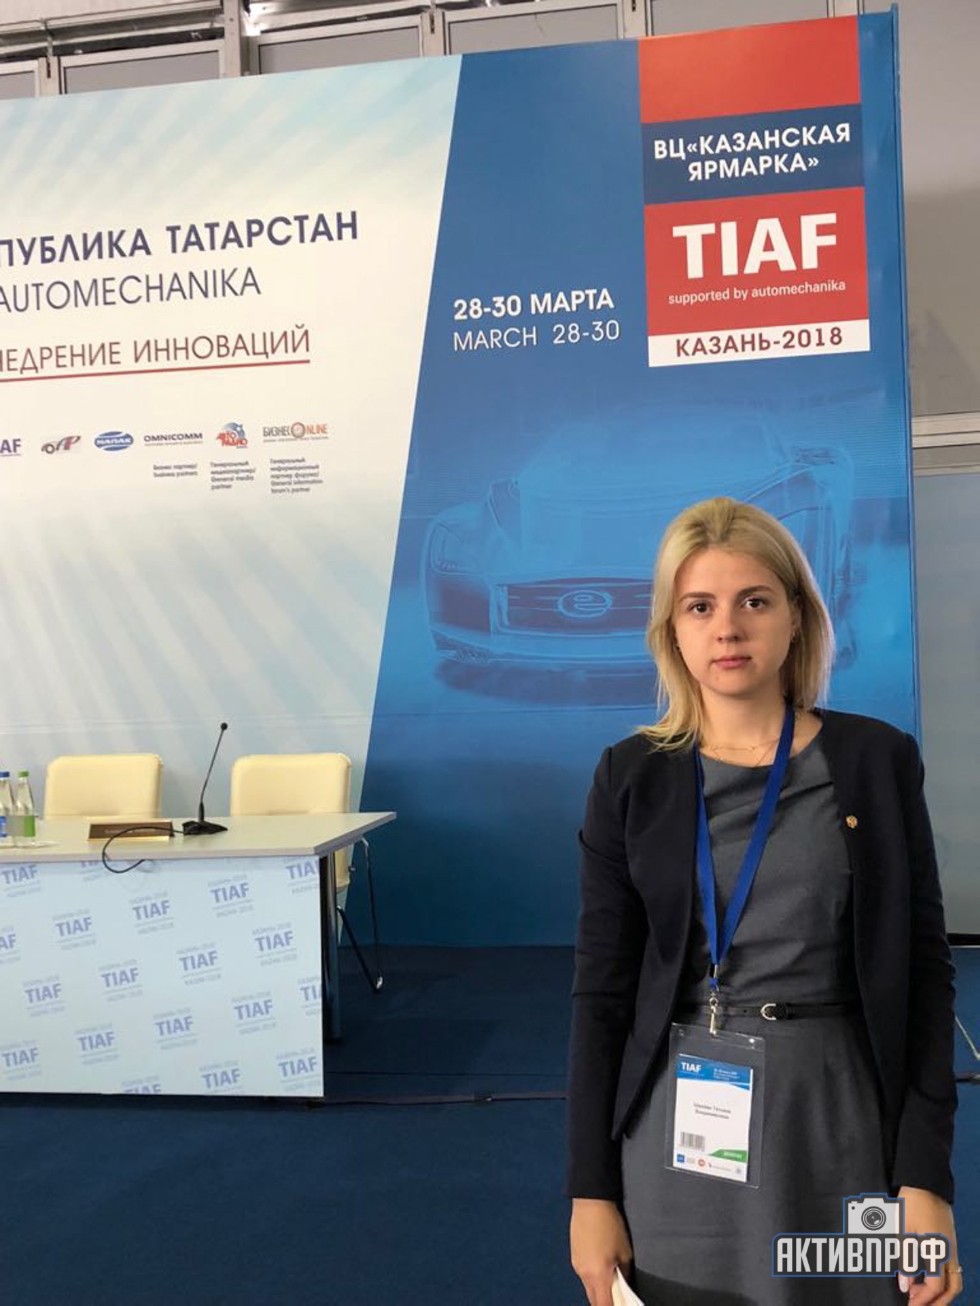         TIAF supported by Automechanika , , , 